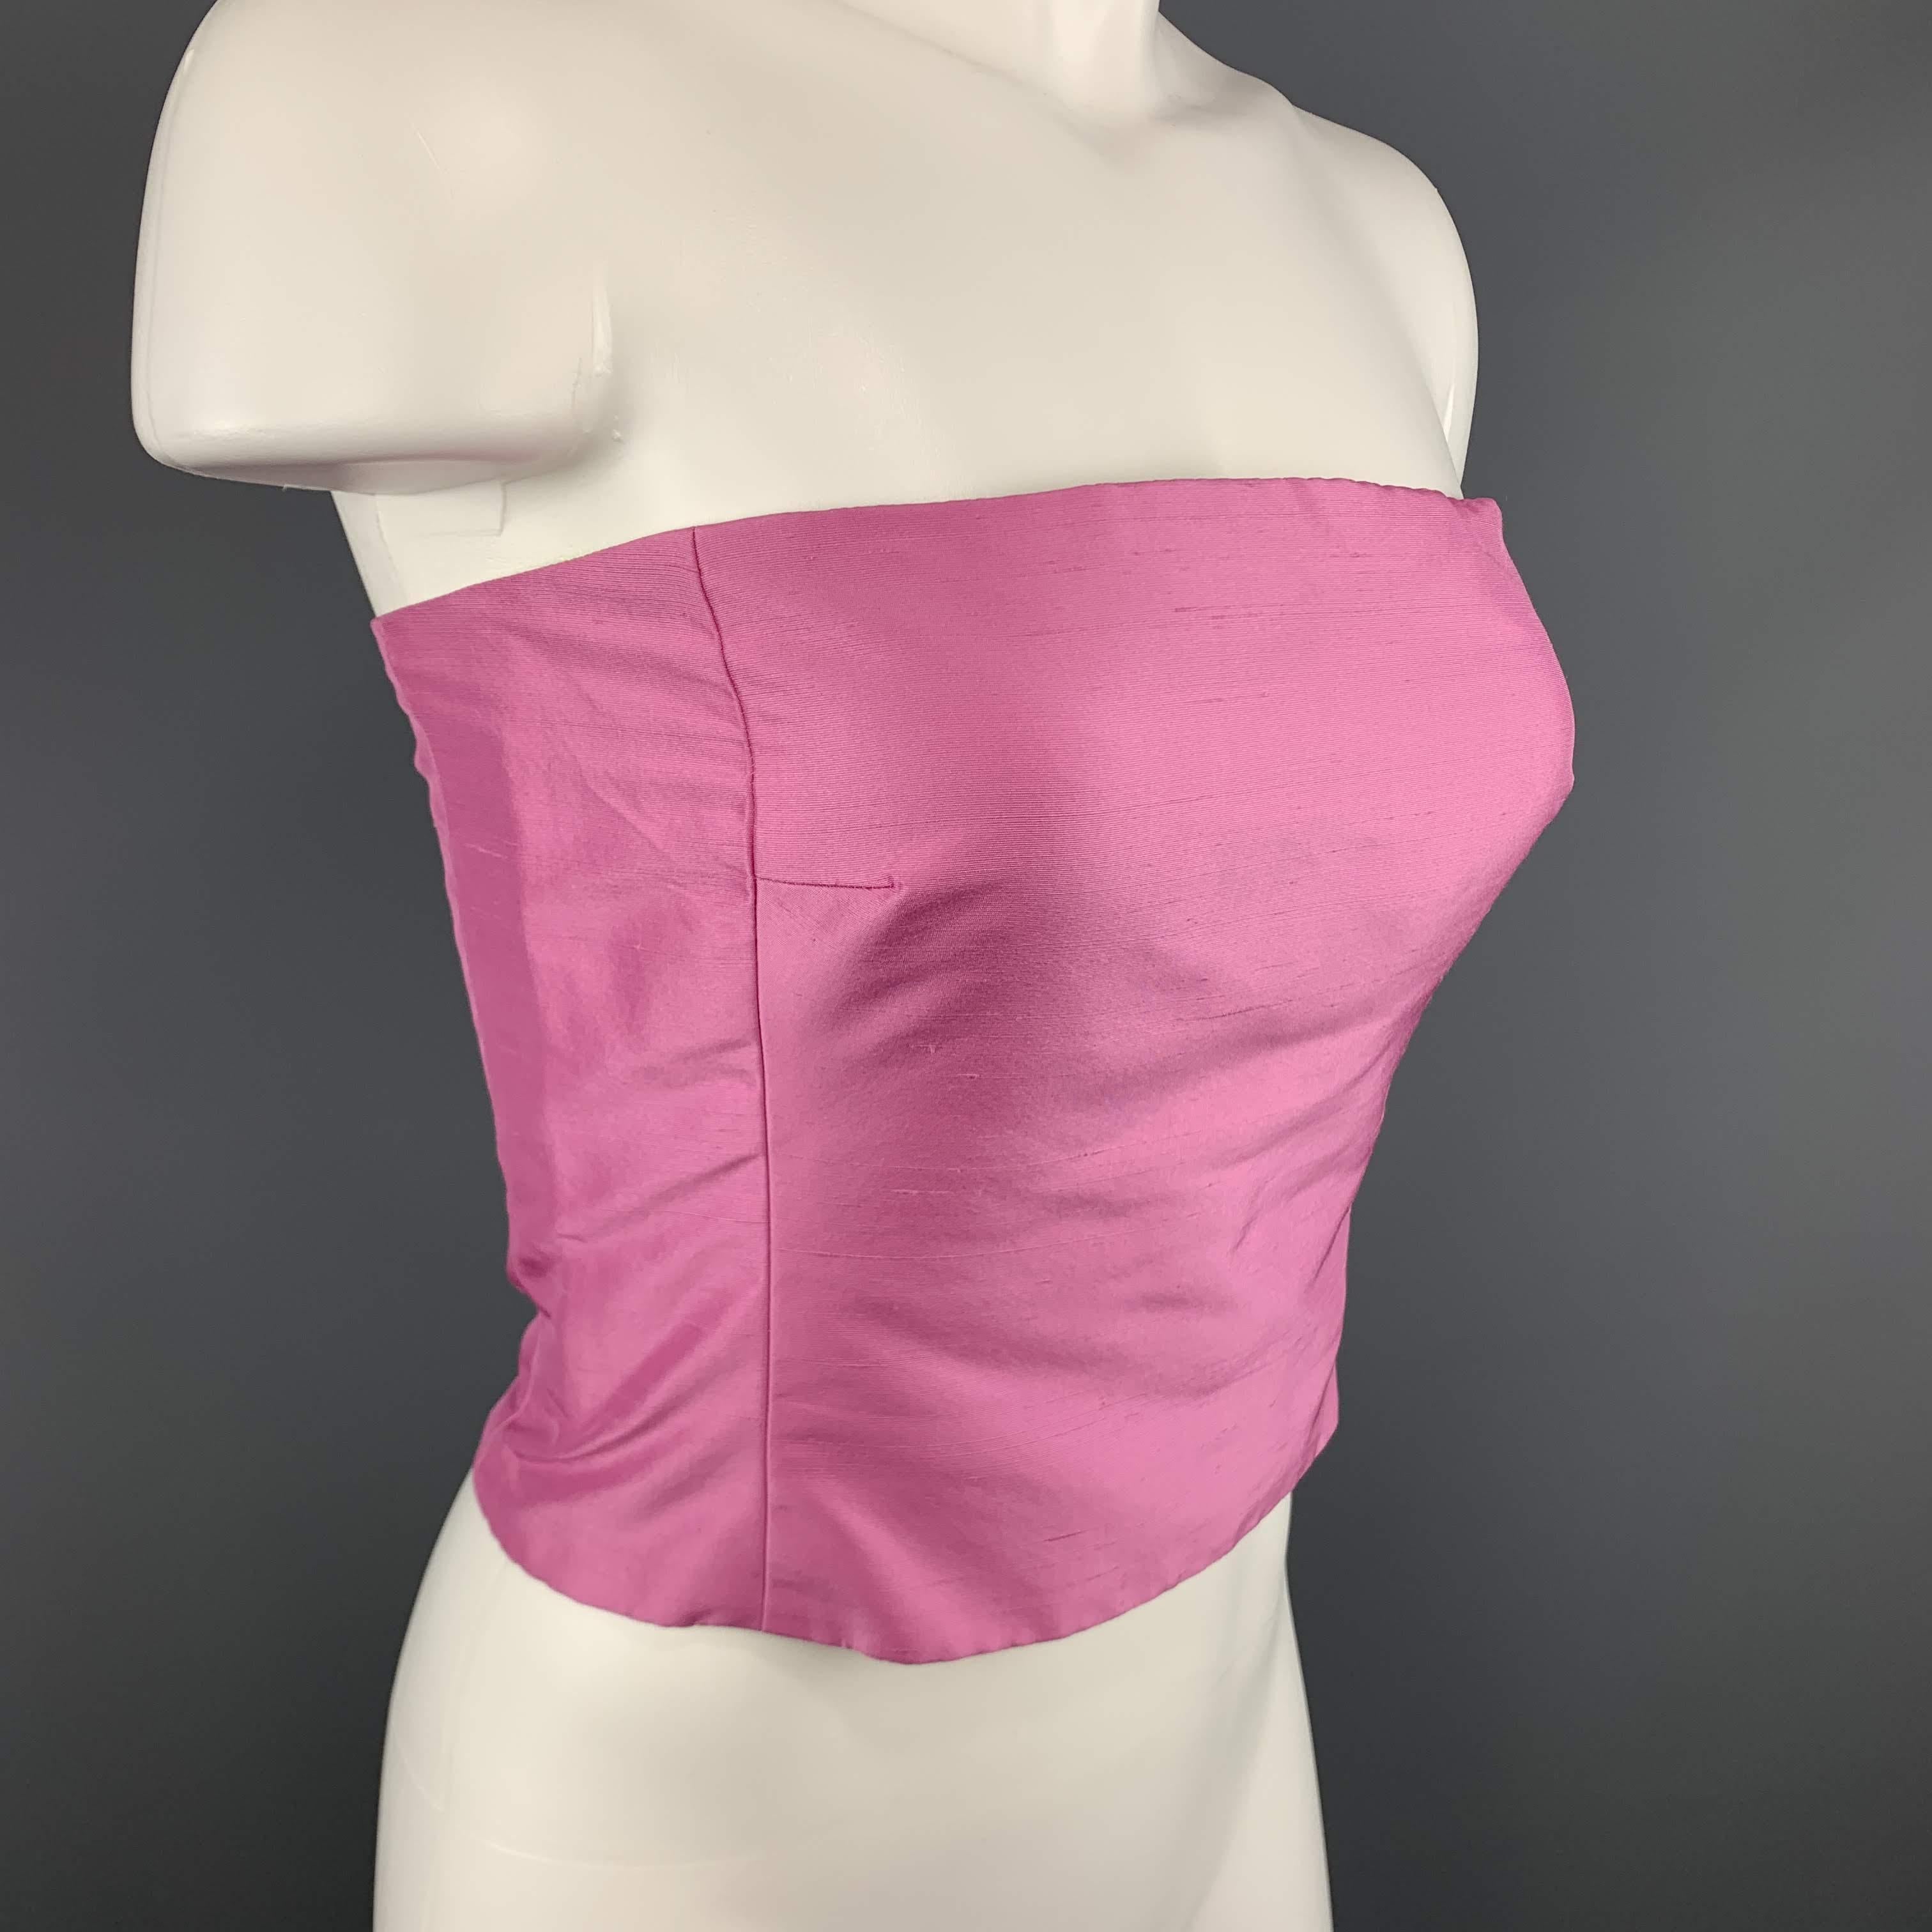 BLACK LABEL by RALPH LAUREN cropped bustier dress top comes in pink silk Shantung with a side zip and lime green liner. Made in USA.
 
Excellent Pre-Owned Condition.
Marked: 8
 
Measurements:
 
Bust: 34 in.
Length: 11 in.